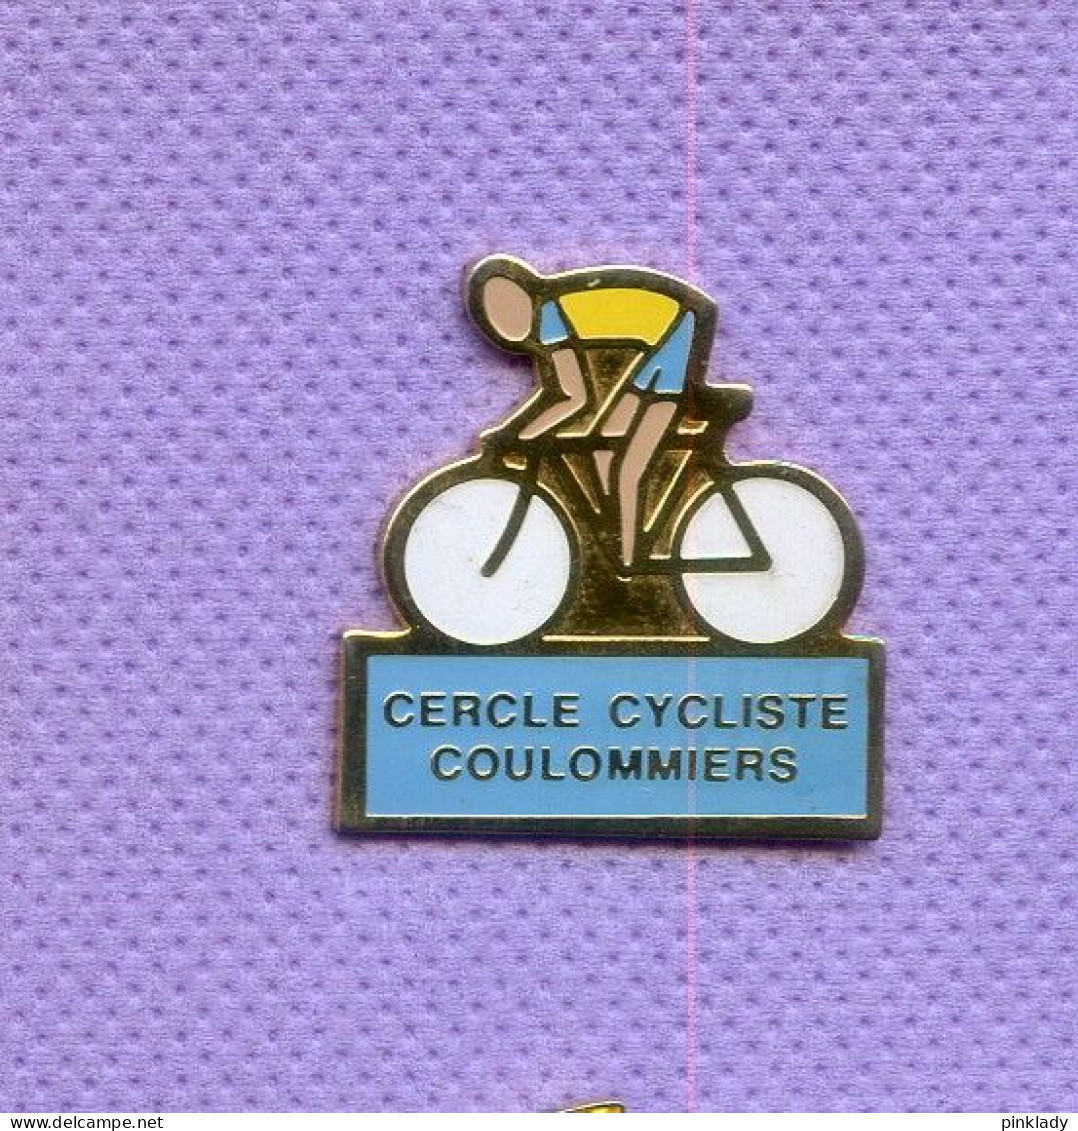 Rare Pins Cyclisme Velo Cercle Cycliste Coulommiers Seine Et Marne 77 I330 - Cycling